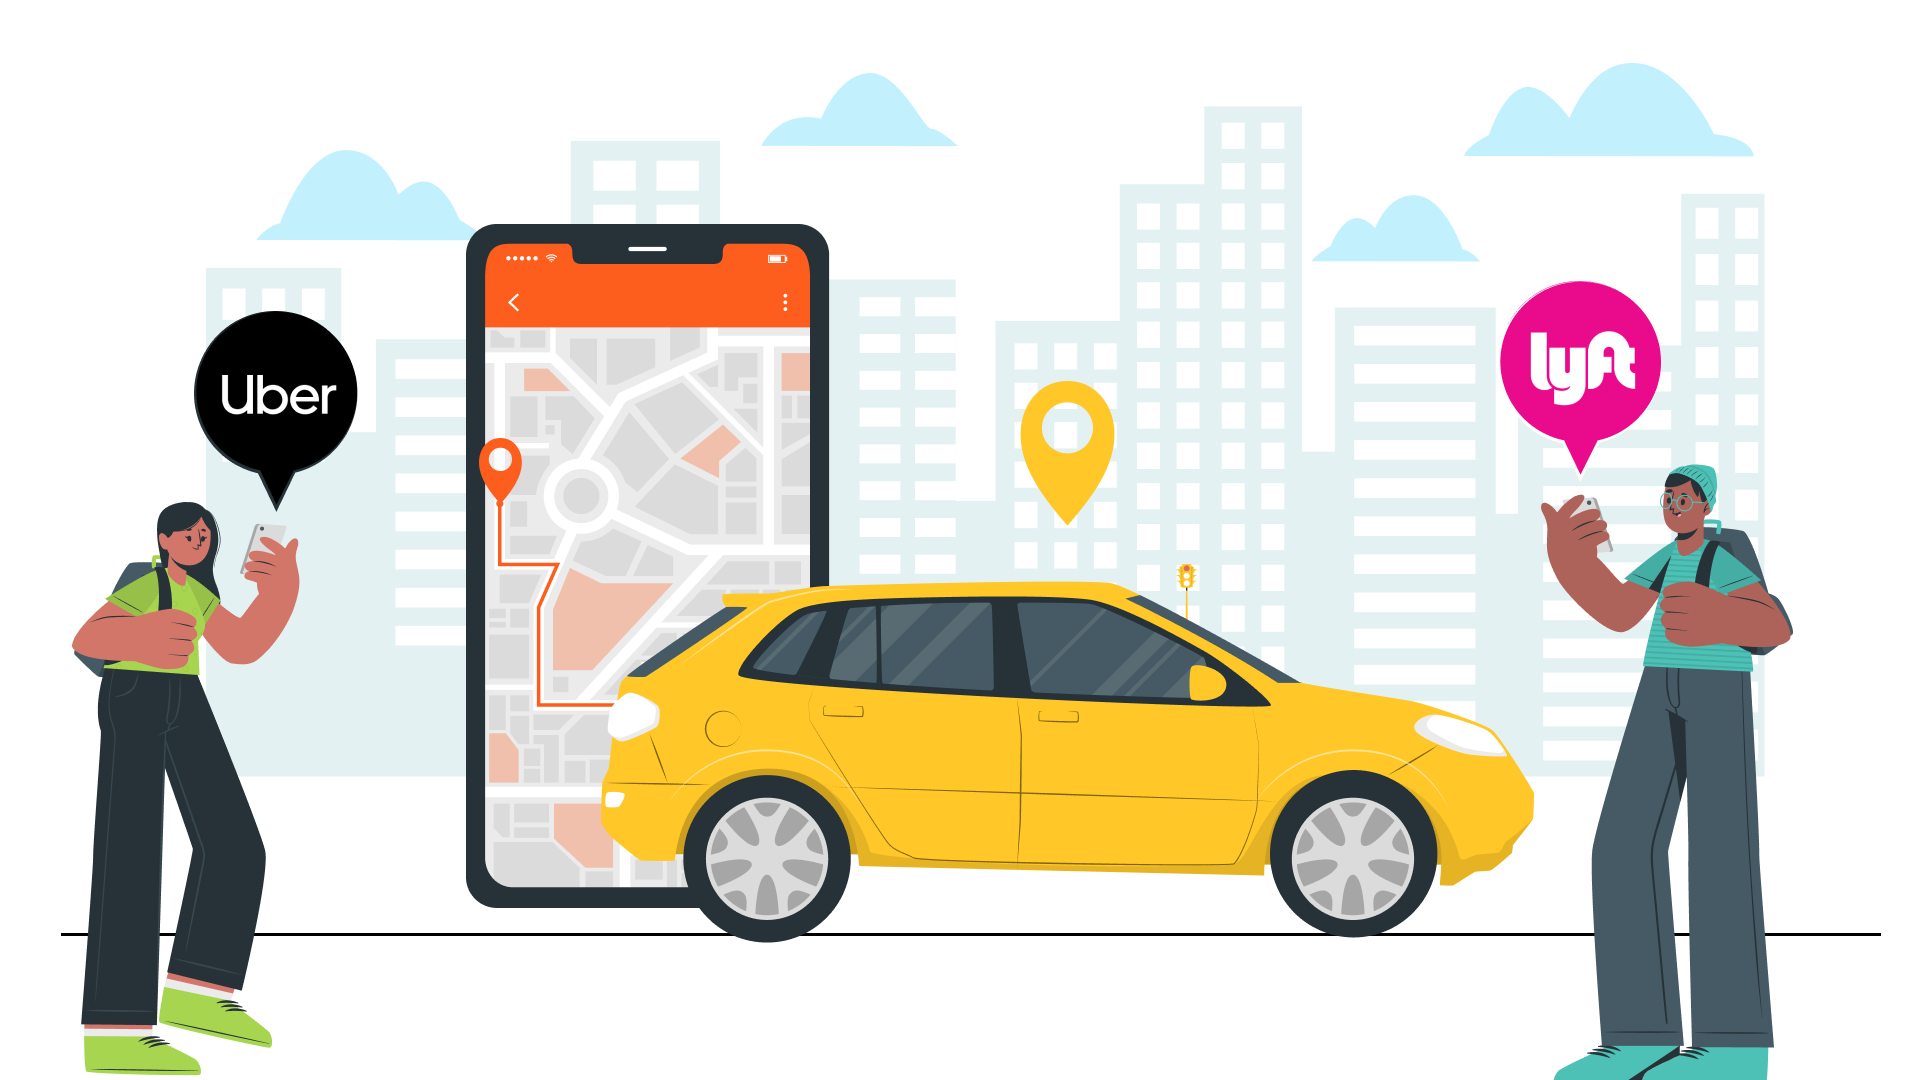 How to Create an App Like Uber and Lyft? : Cost, Features & More